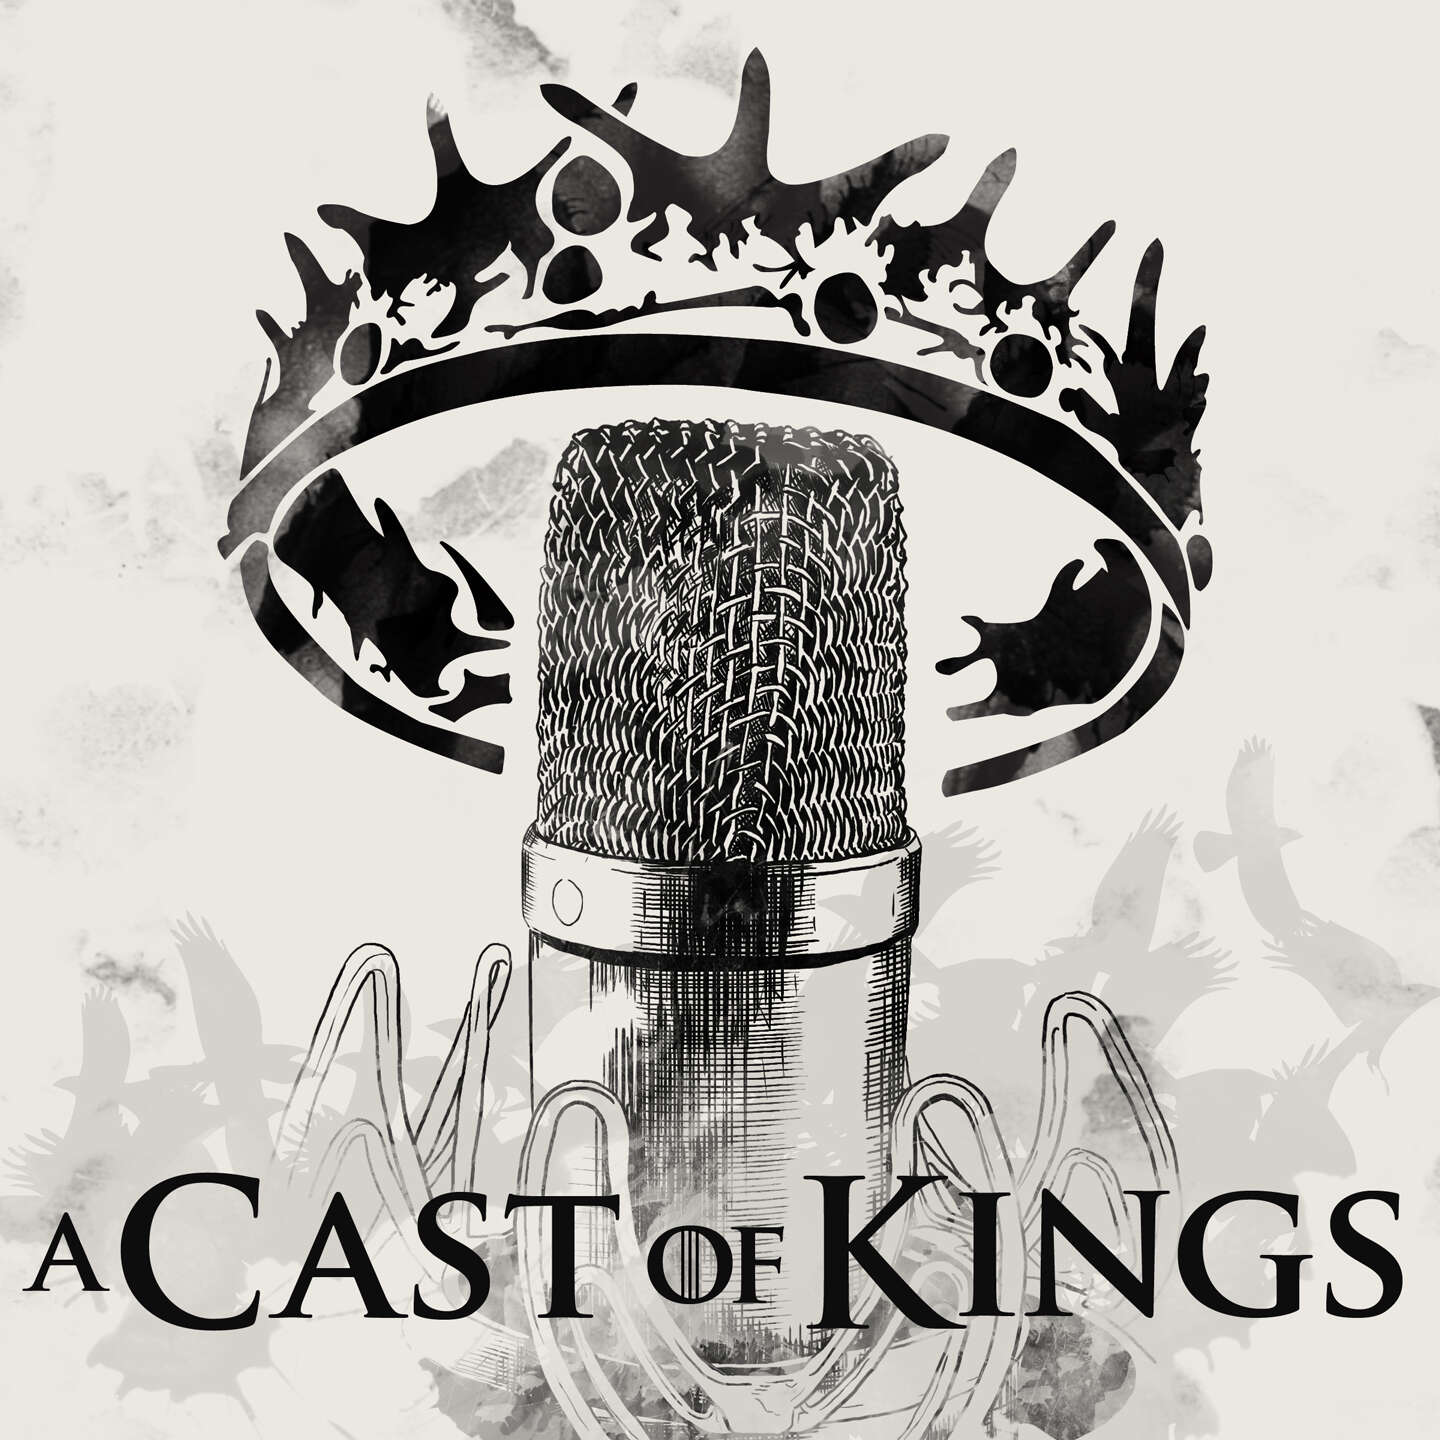 A Cast of Kings